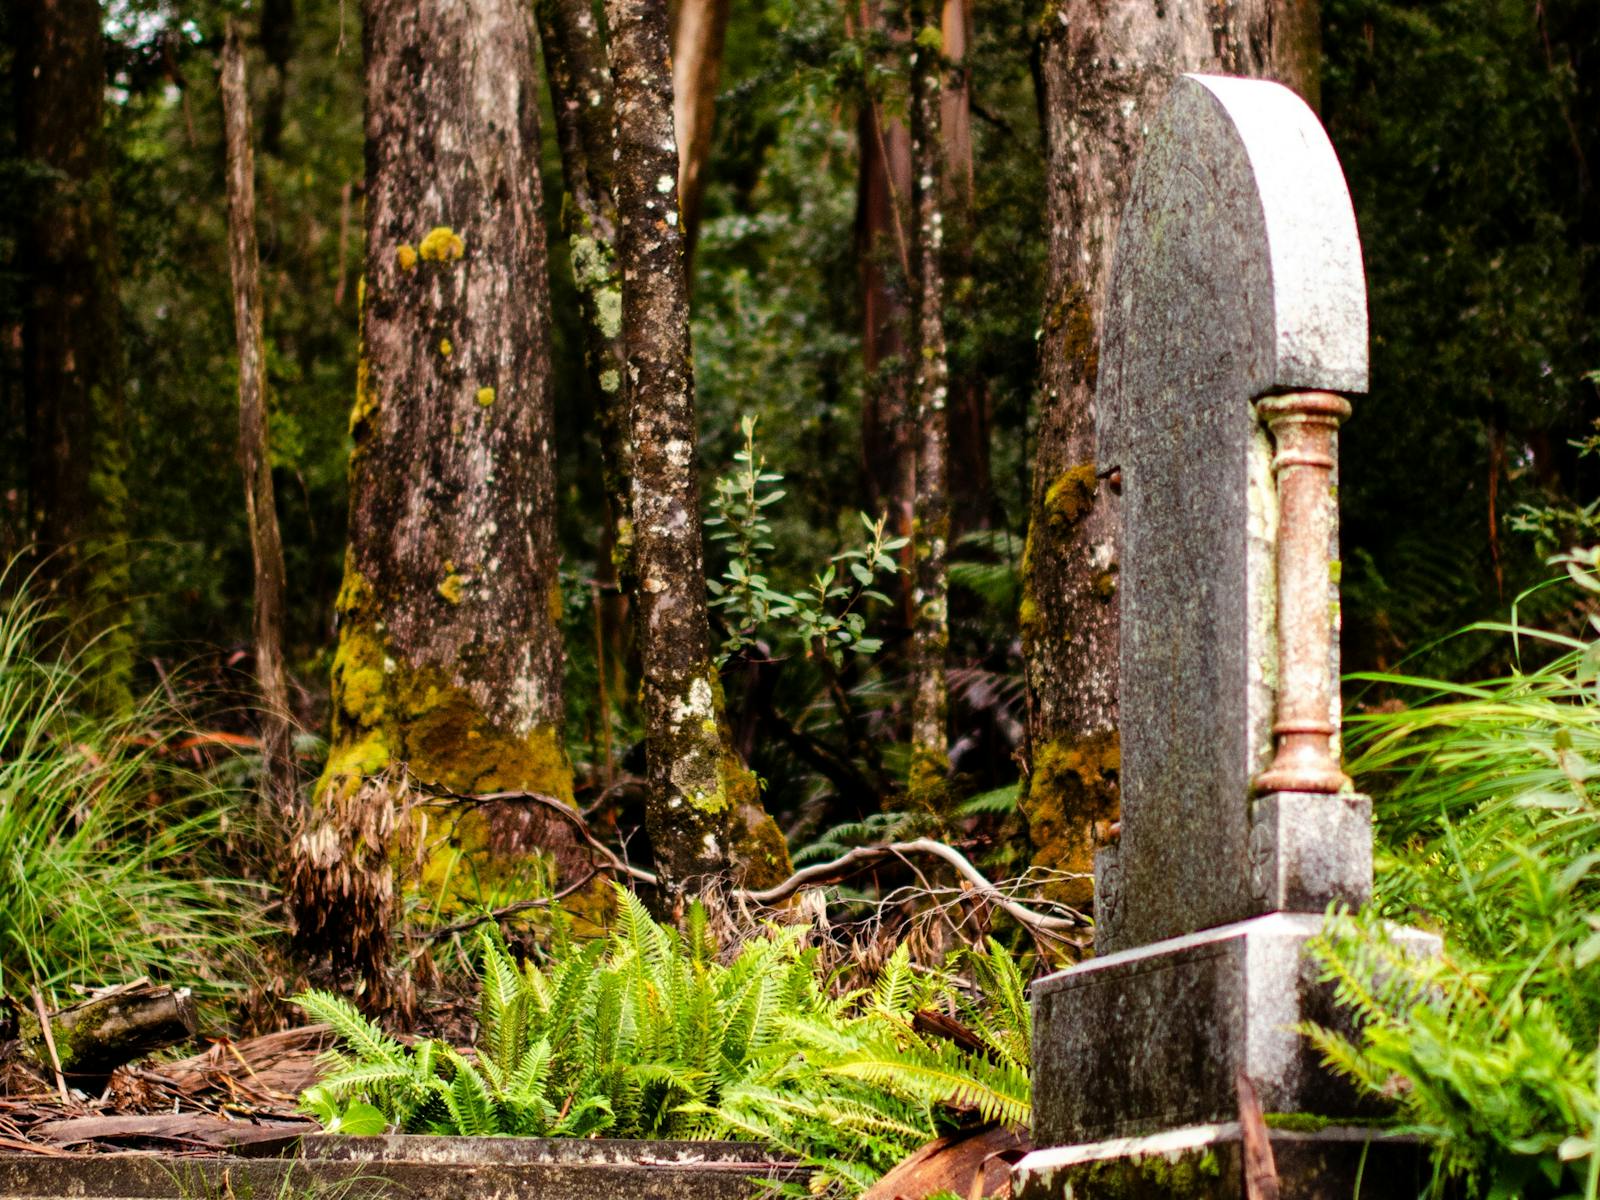 Multiple stone graves on incline into the rainforest with one prominent gravestone